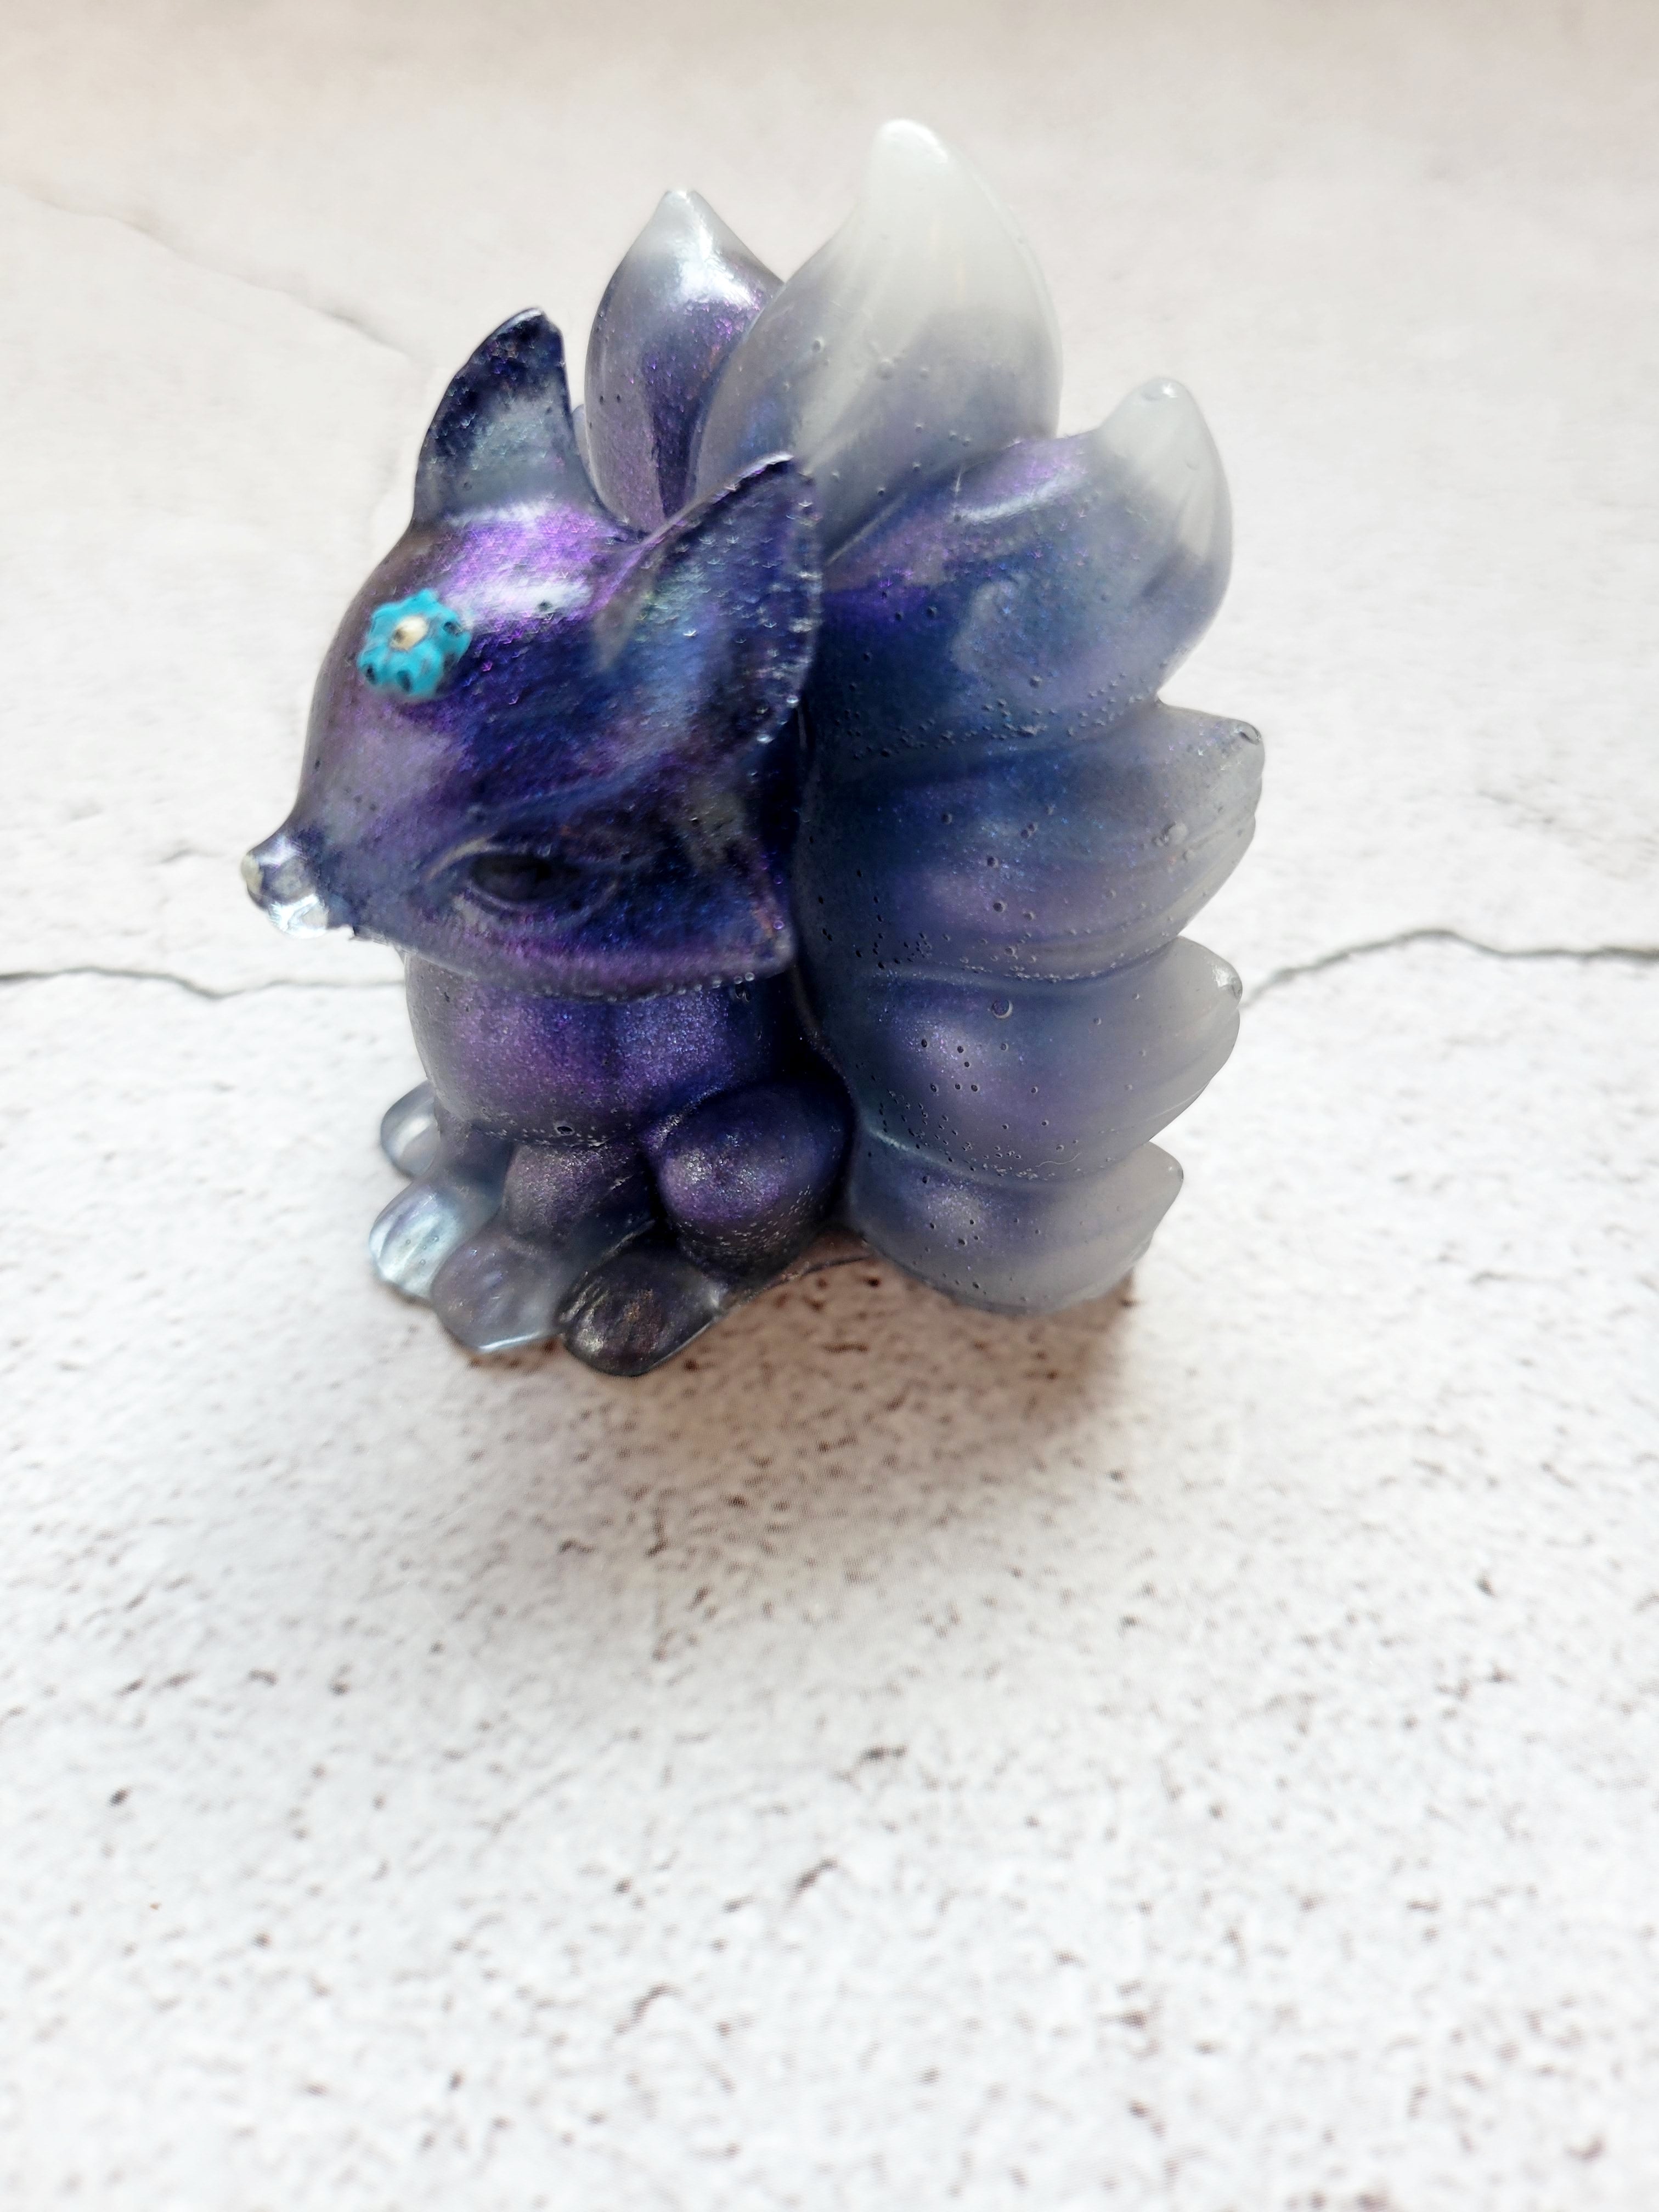 A side view of a kitsune fox figure with nine tails. It's body is deep blue with a blue and white swirled tail. It has black eyes, white nose, and light blue flower on its head.